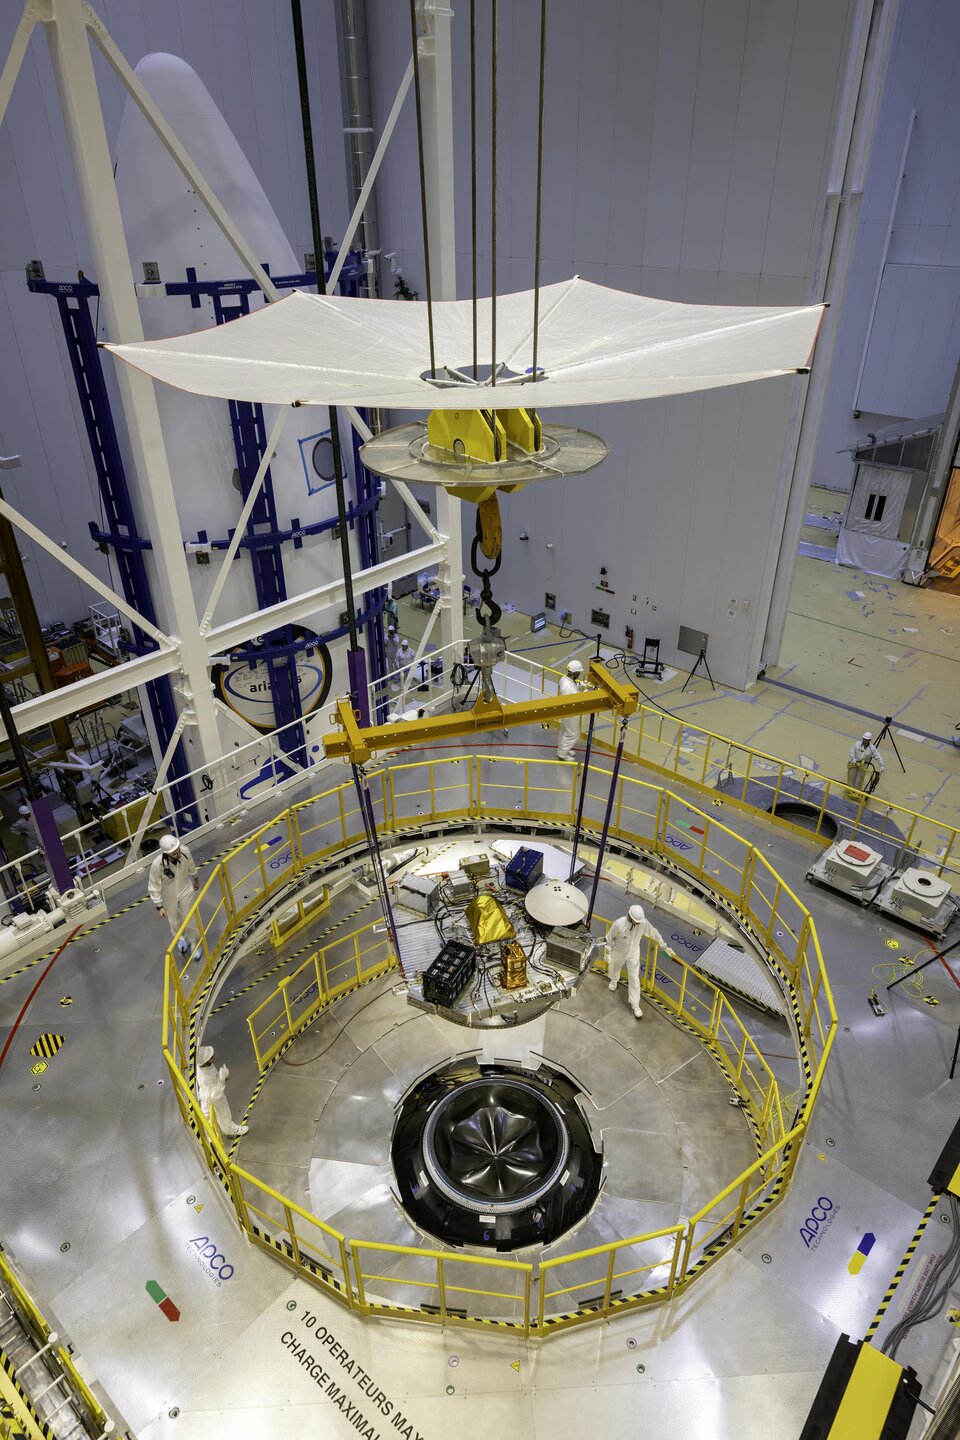 Technicians prepare the payloads and ballast for the first flight of Ariane 6 